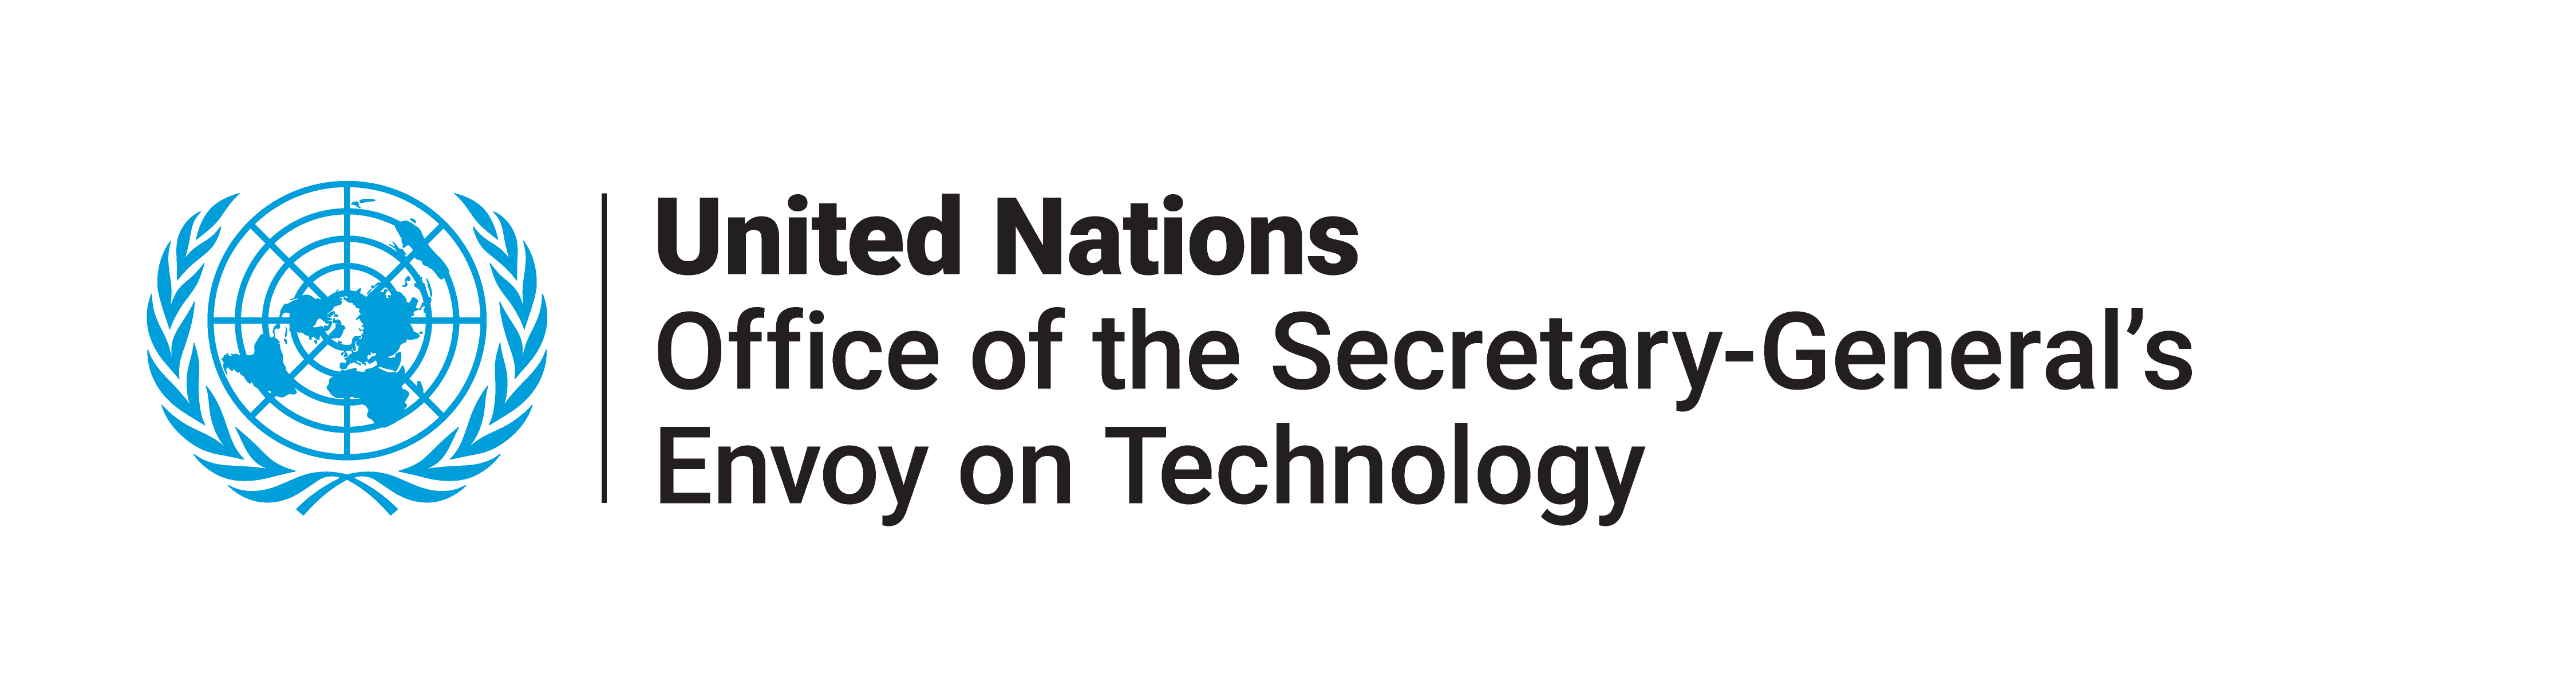 Office of the Secretary-General's Envoy on Technology